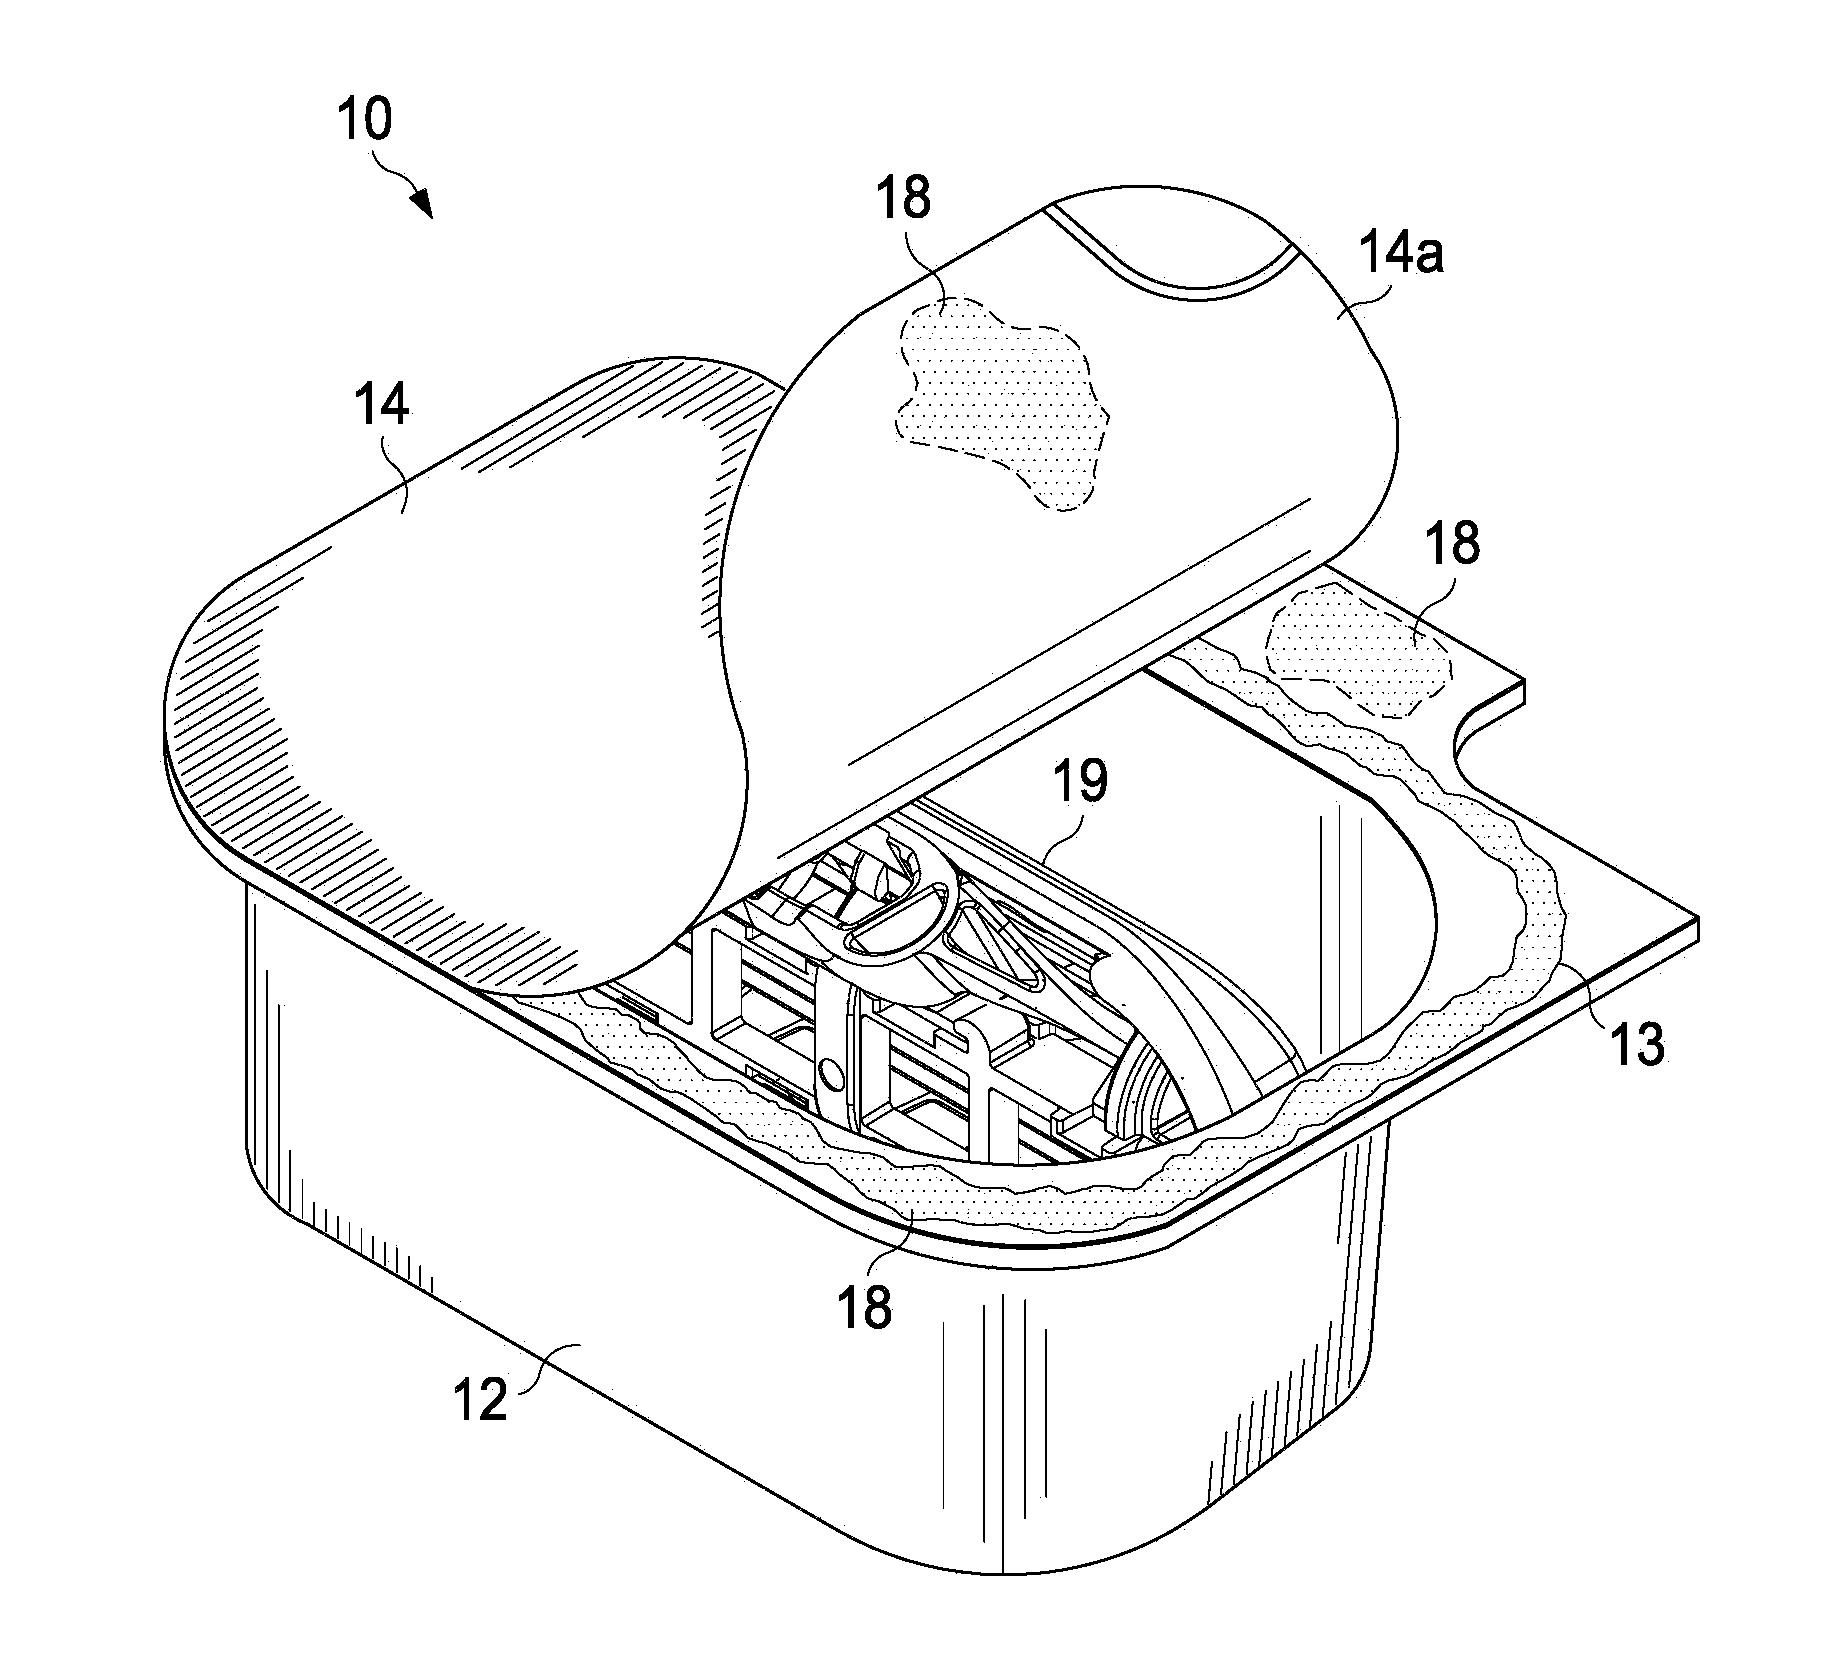 Package with Internal Sensory Elements